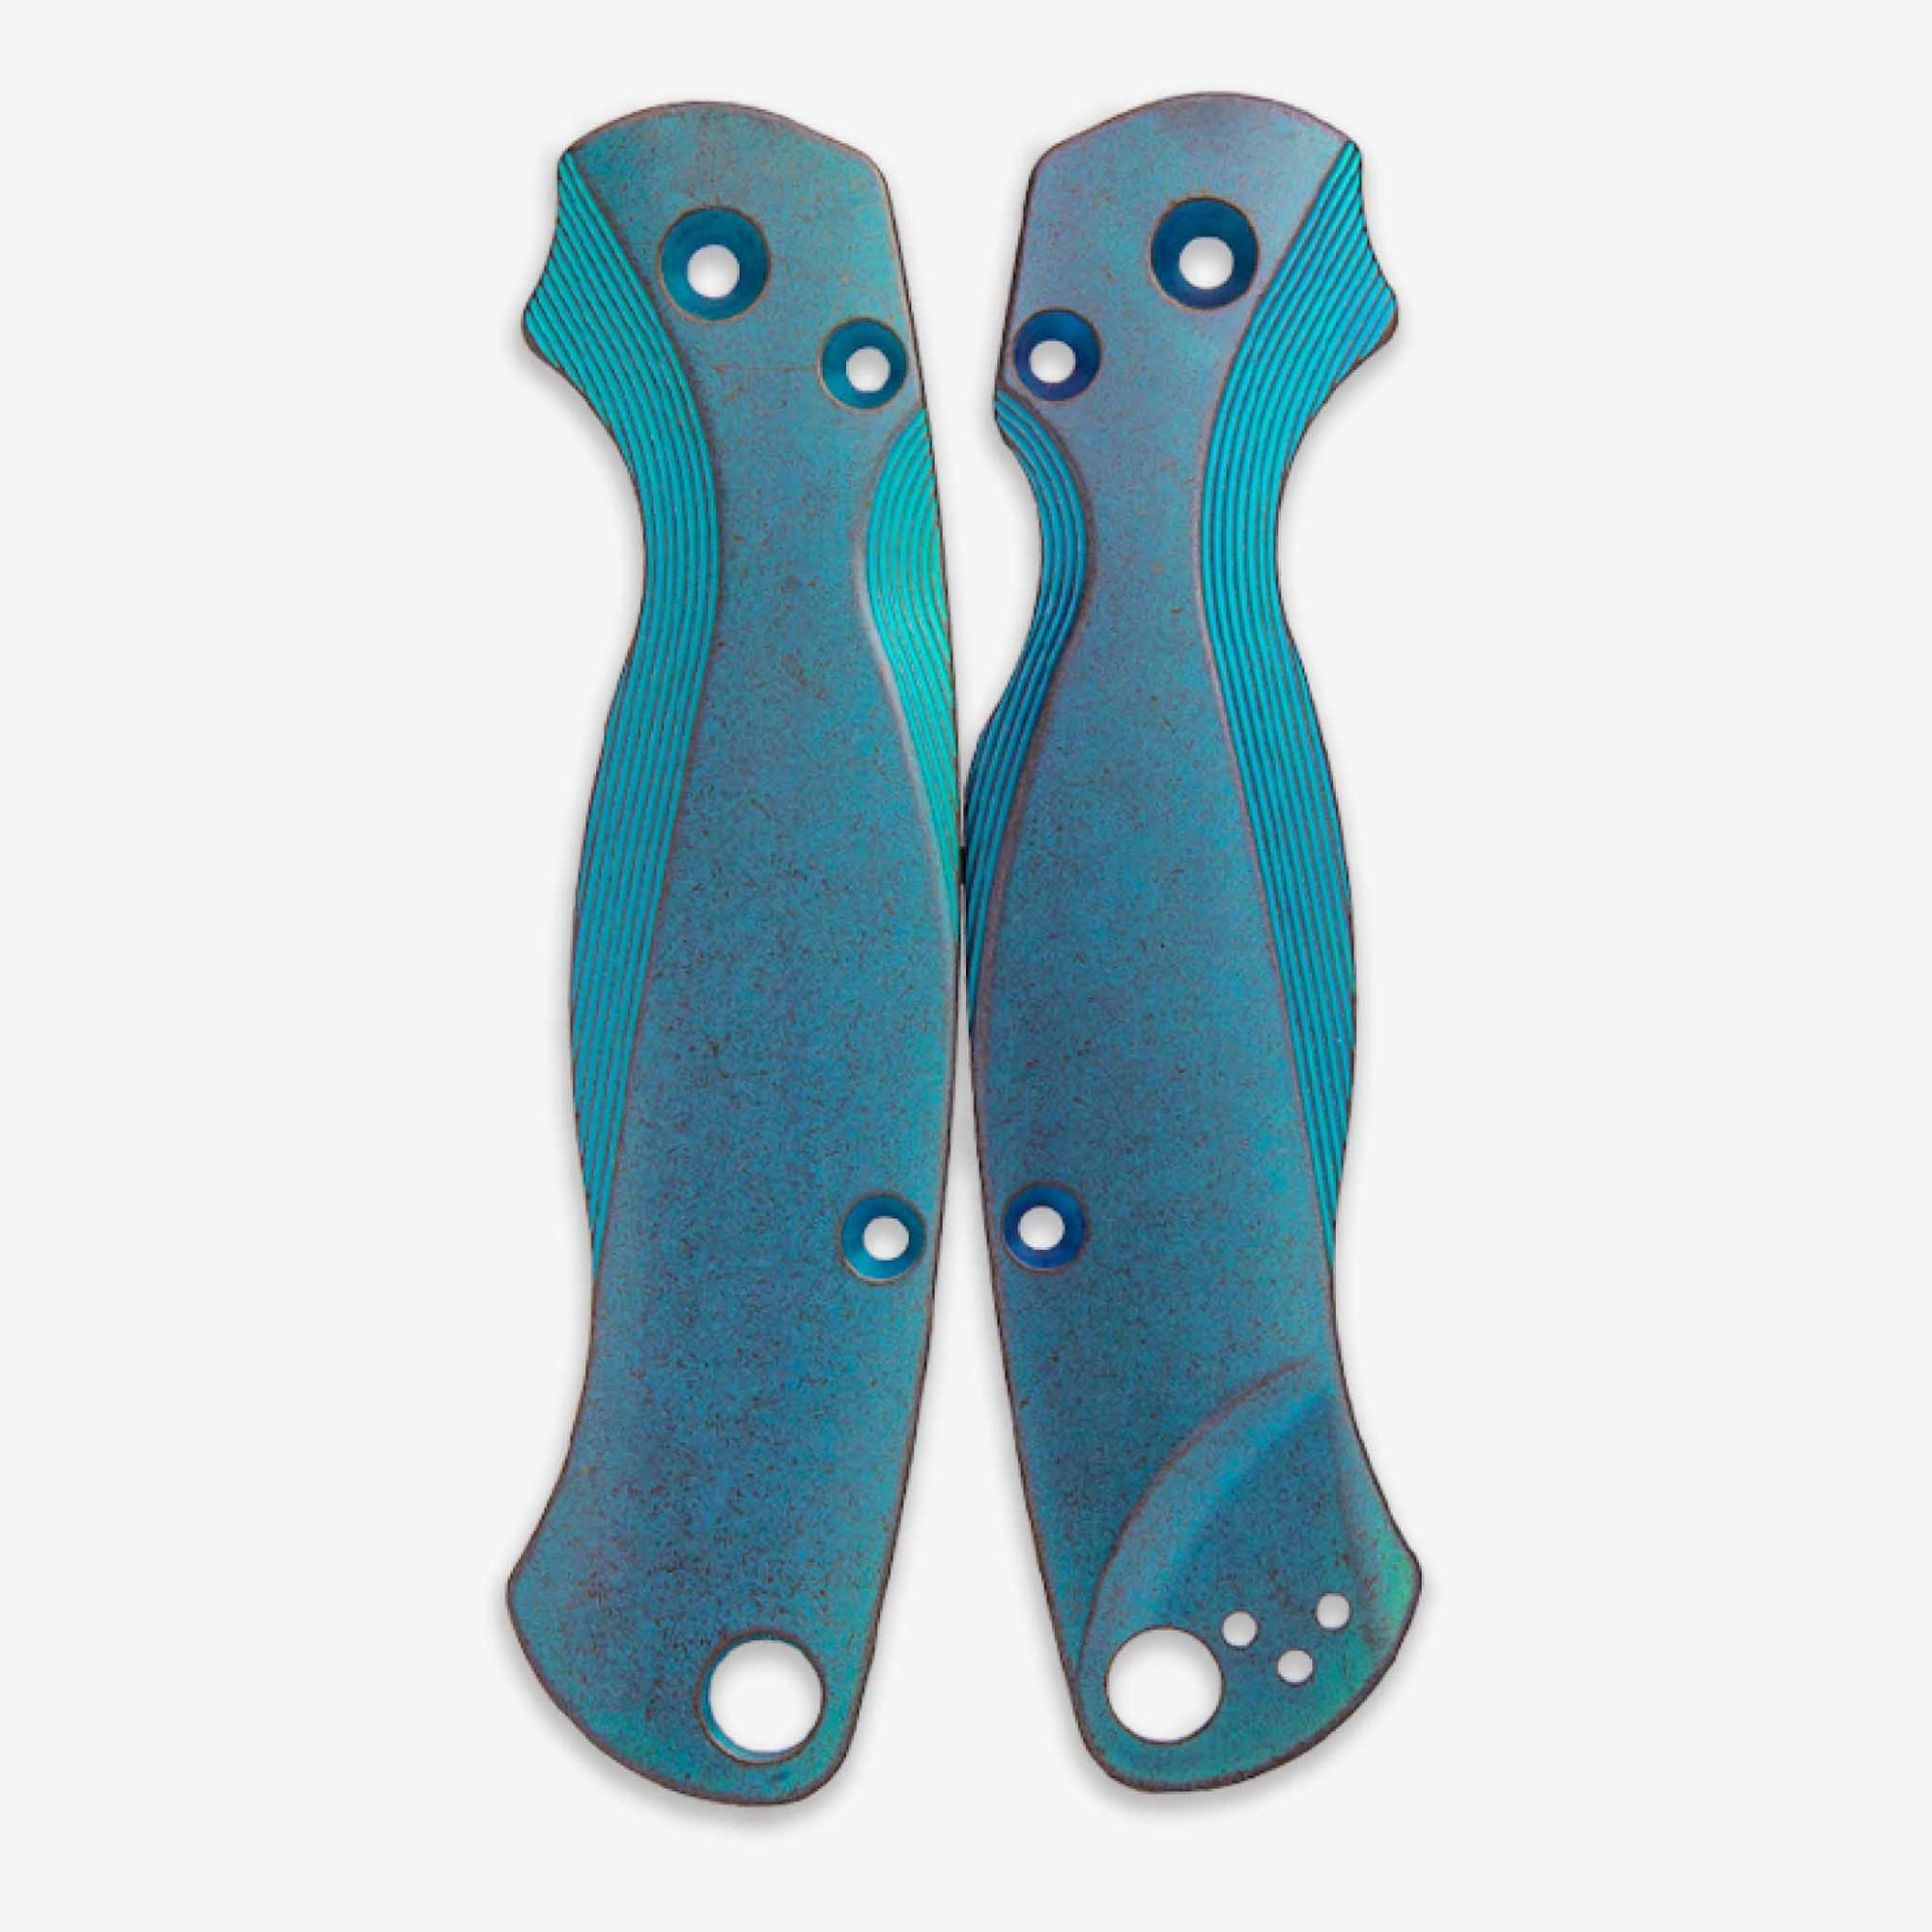 Spyderco Paramilitary 2 scales in the limited edition Europa finish, which is a mix of icy blue and hints of bronze.